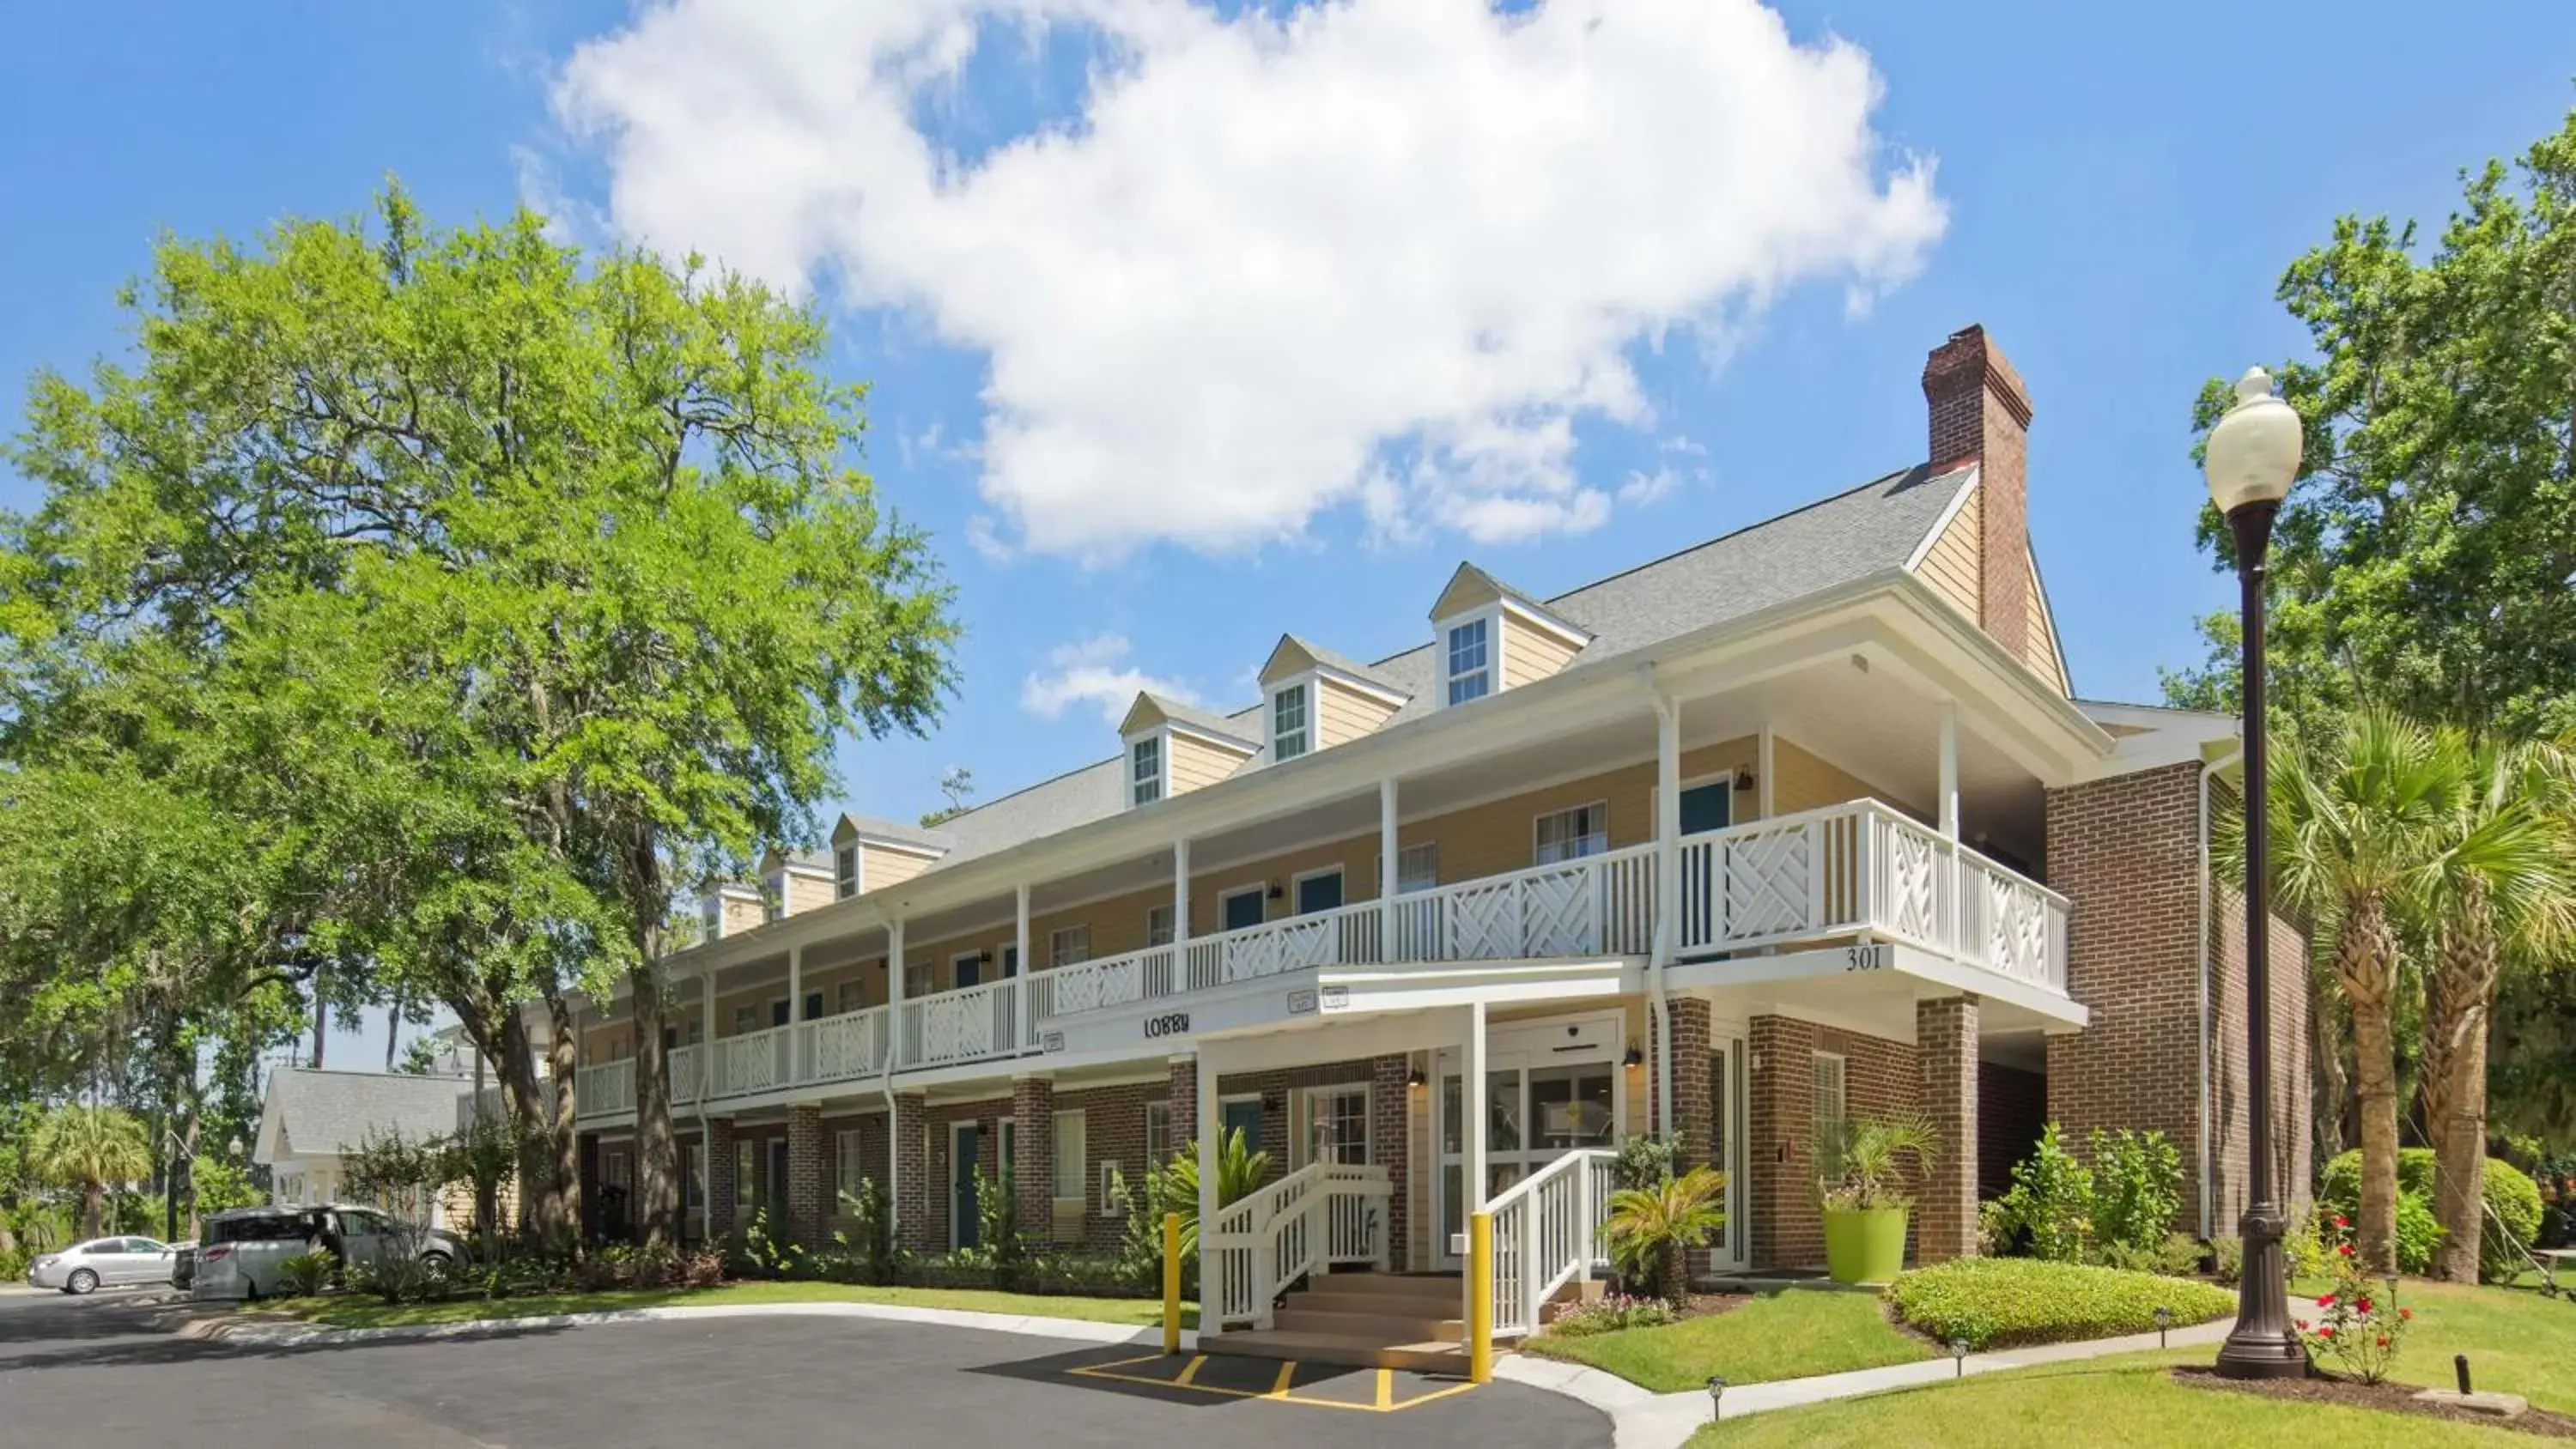 Property building in Best Western Plus St. Simons